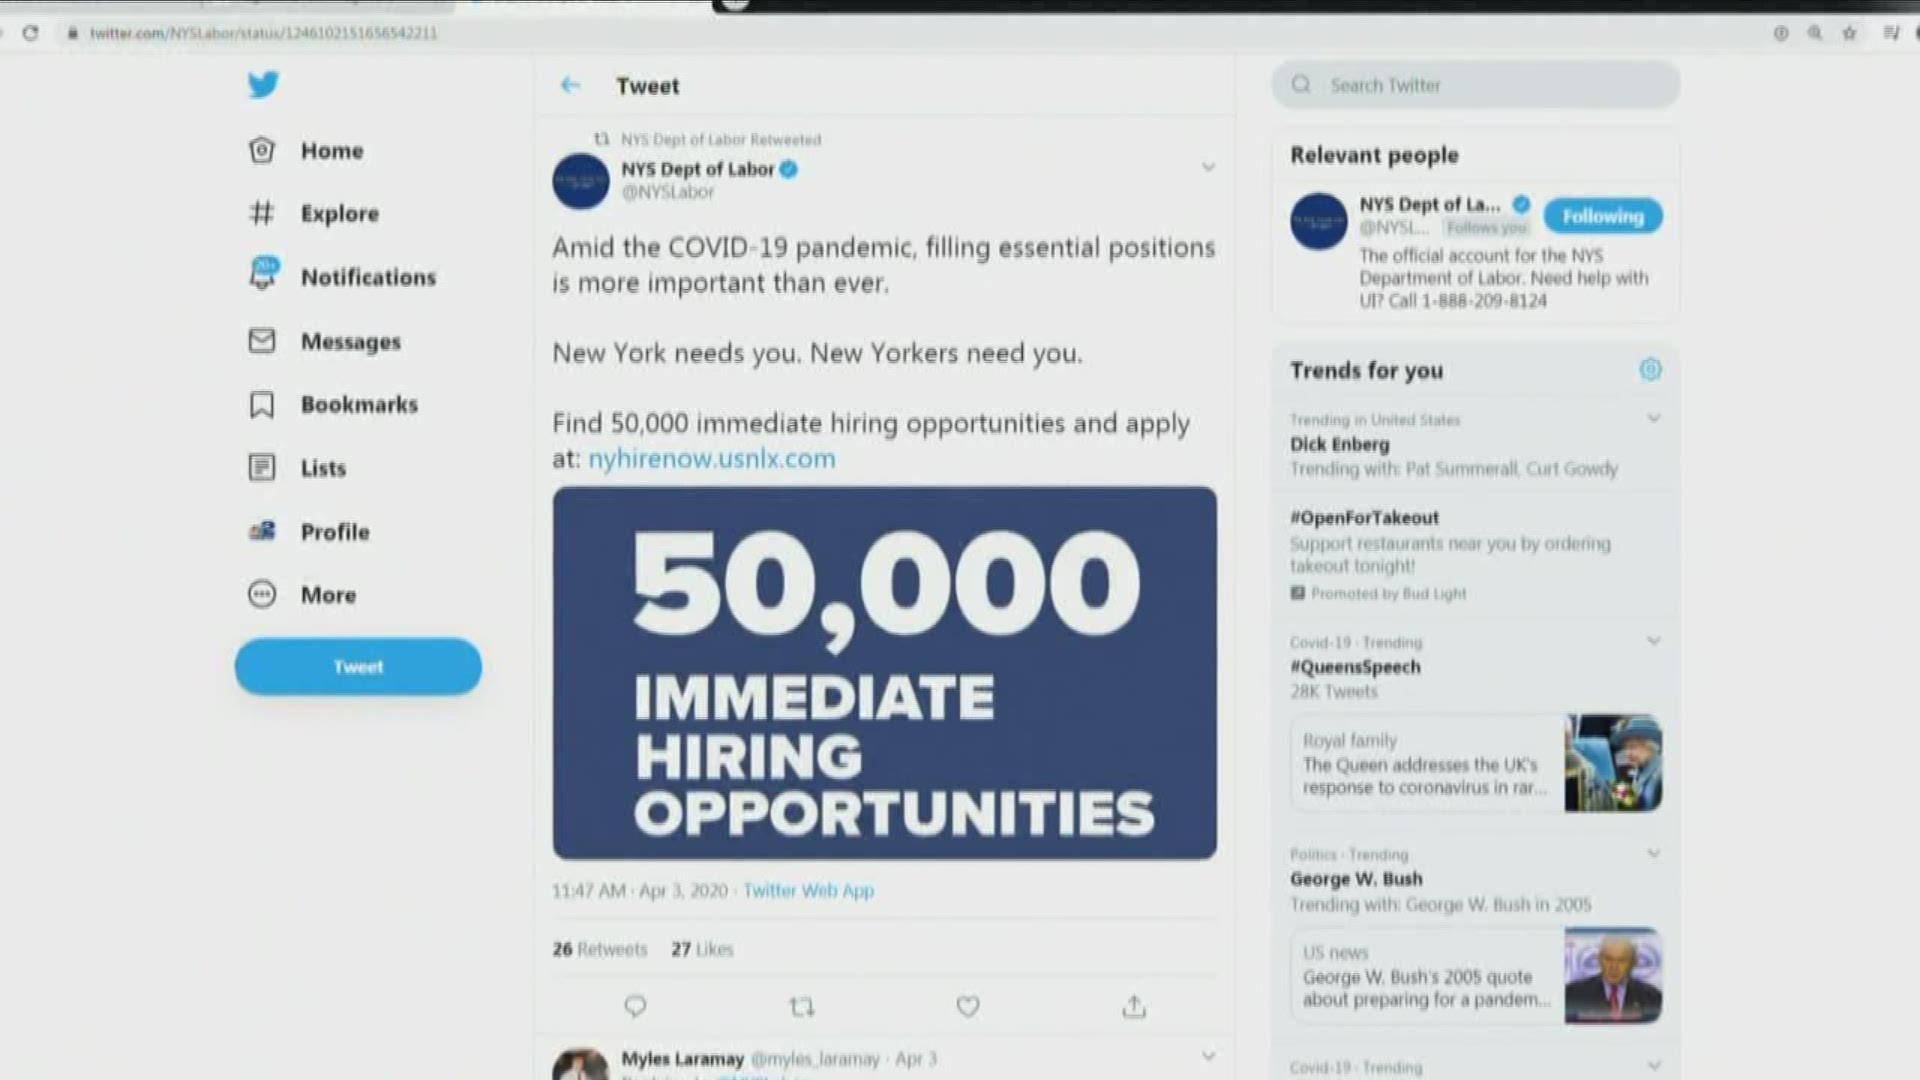 There are places looking to hire that need more people because of the outbreak. The state labor department sent this tweet today, with 50-thousand positions to fill.